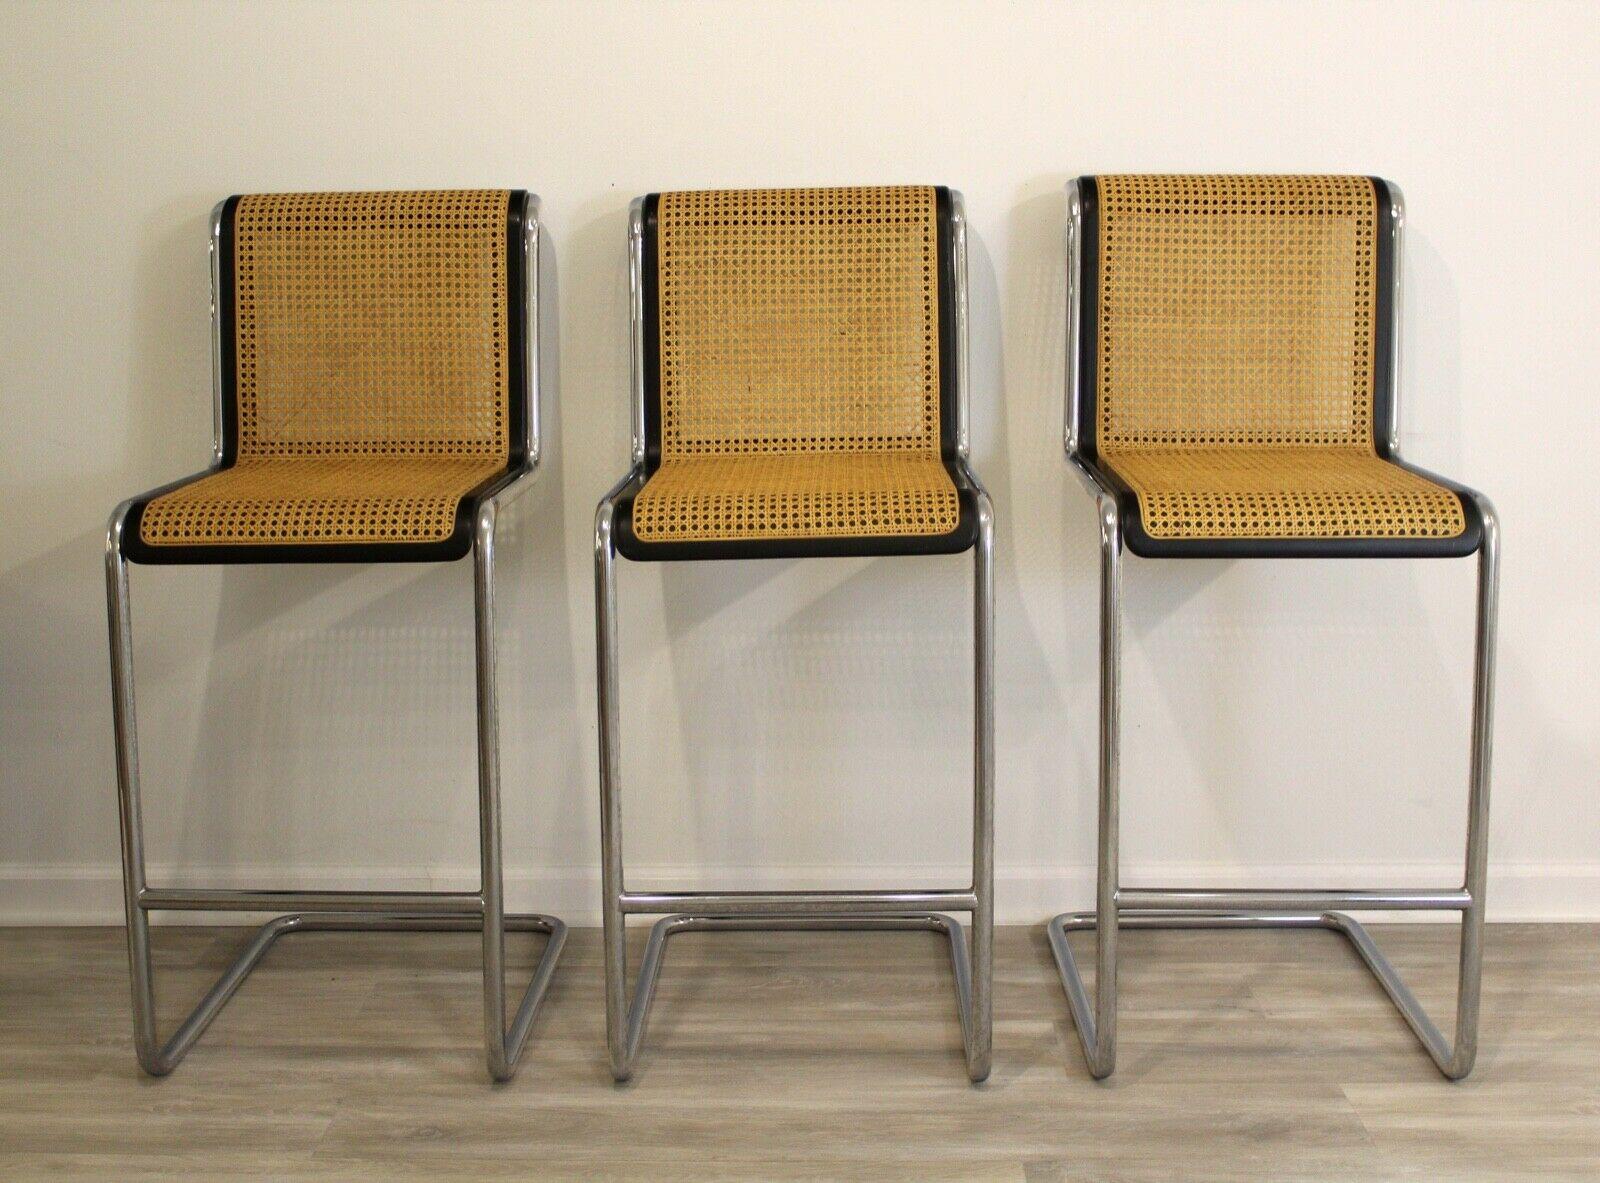 From Le Shoppe Too in Michigan comes this set of three iconic Marcel Breuer Cesca Bar stools. Italian made in the 1970's, this design has become a classic representation of both Knoll and Breuer. Detailed with a caned back and seat as well as gentle